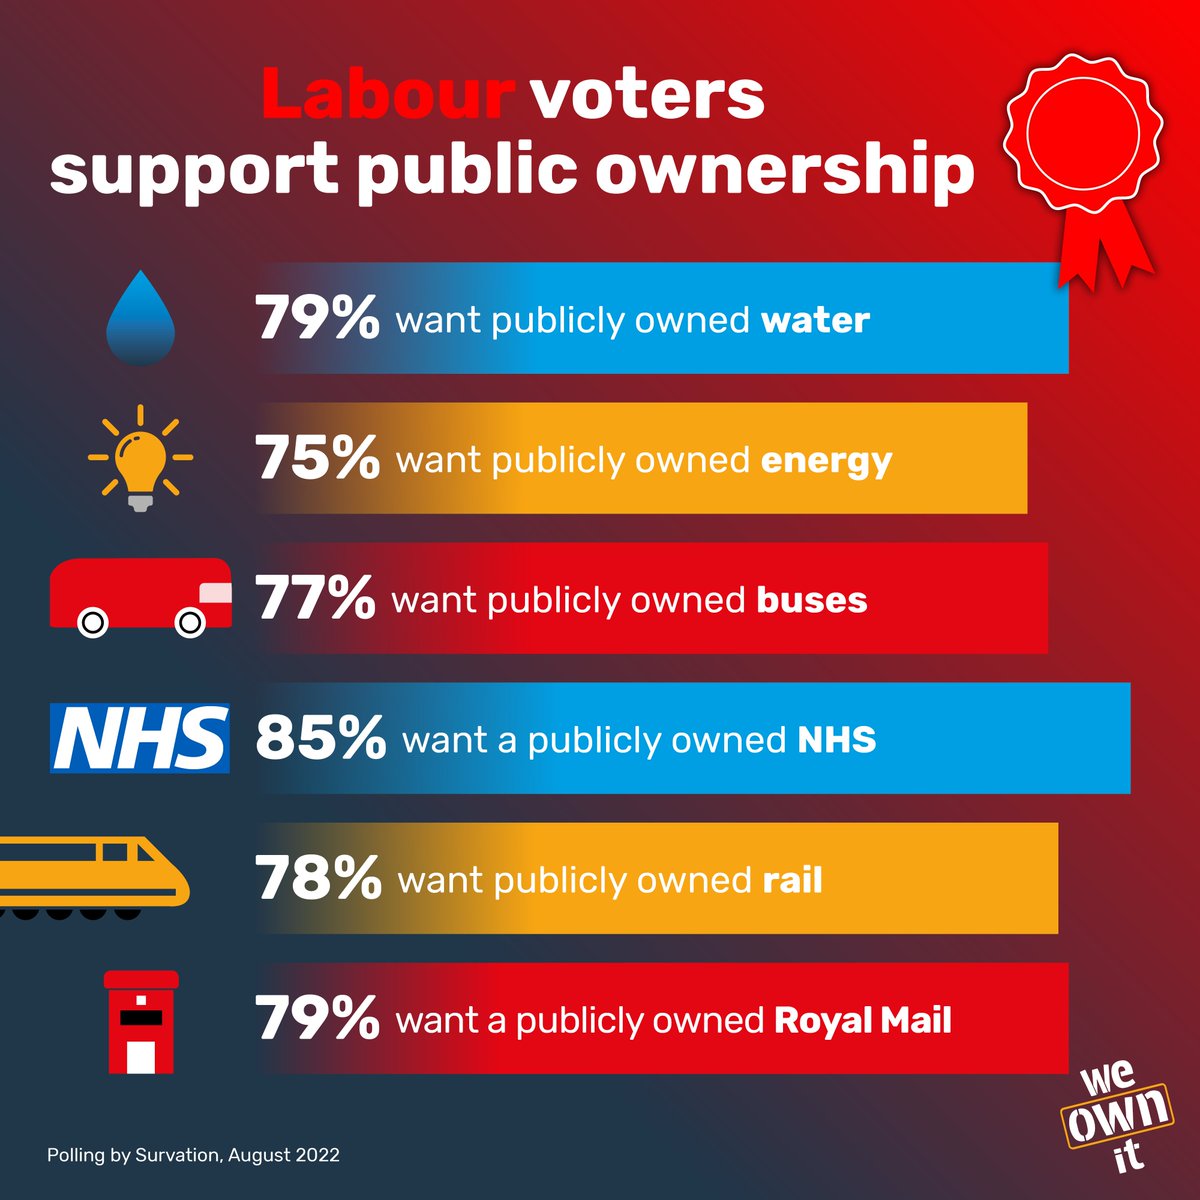 'Our first step is to set up Great British Energy, a publicly owned clean energy company by and for our citizens' 'It will cut bills and create the next generation of good jobs' 👏👏👏@Ed_Miliband This is a big win for public ownership - Labour voters want more of this